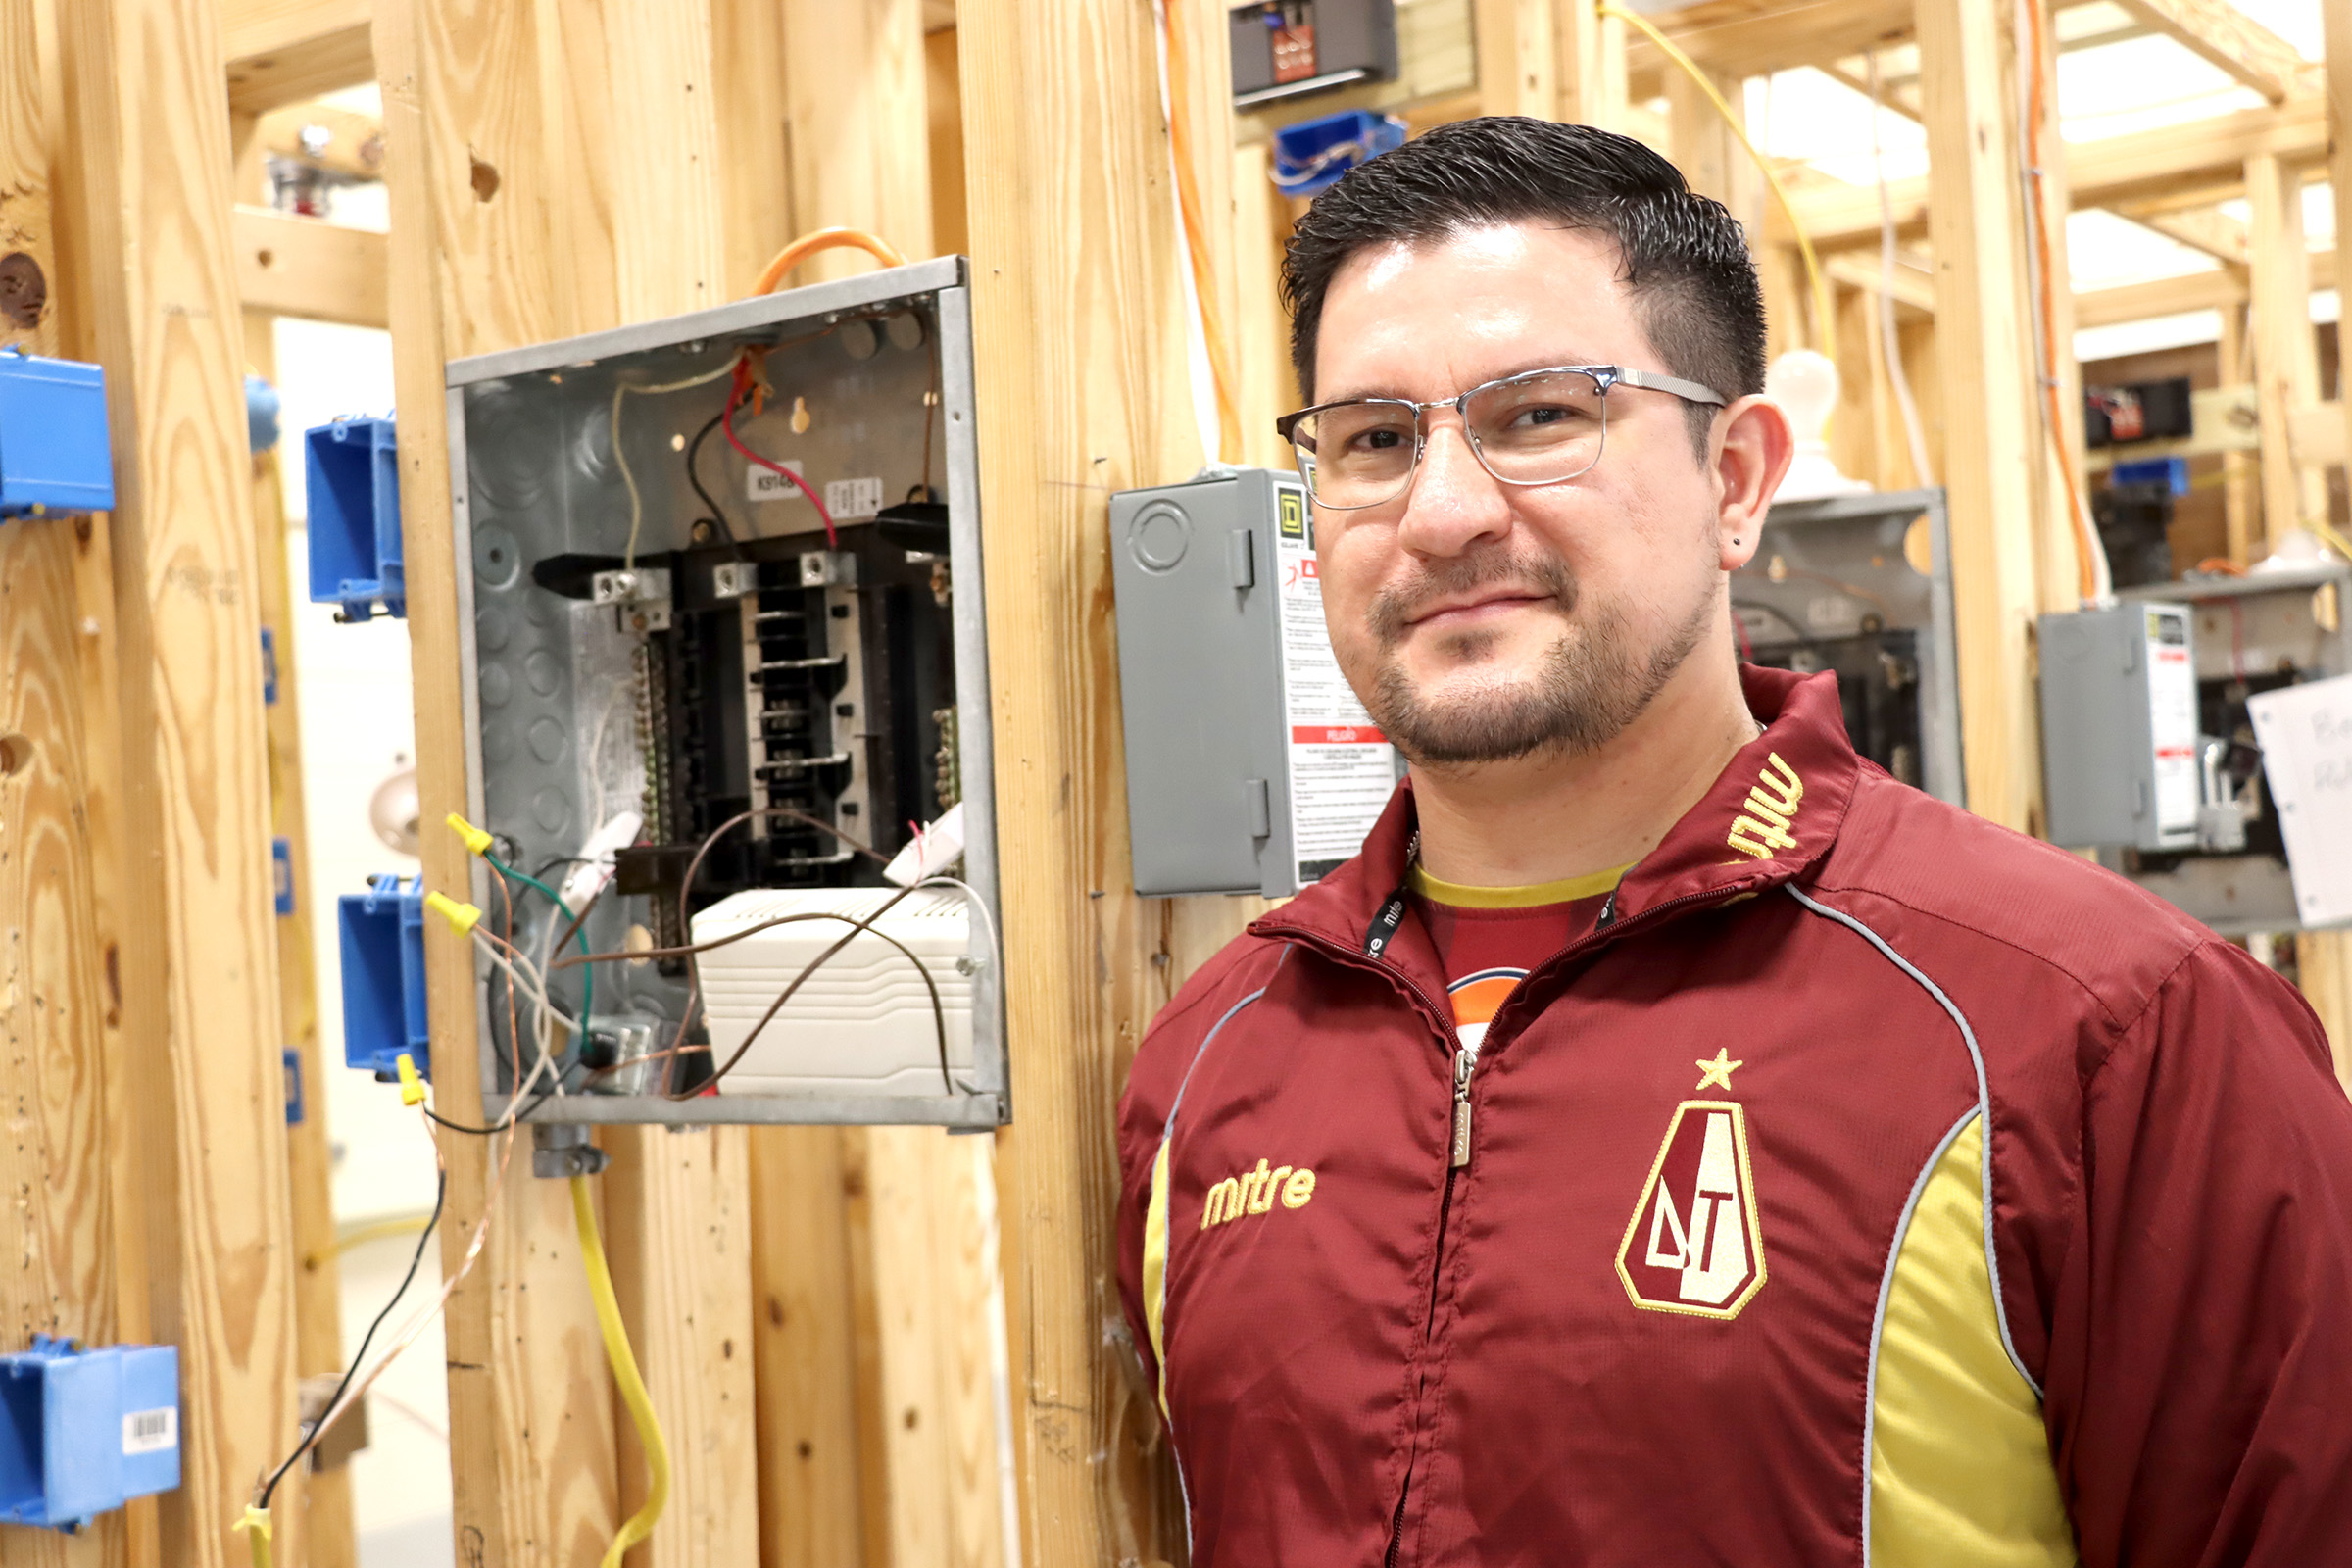 MGCCC’s Electrical Technology program earns top recognition nationwide